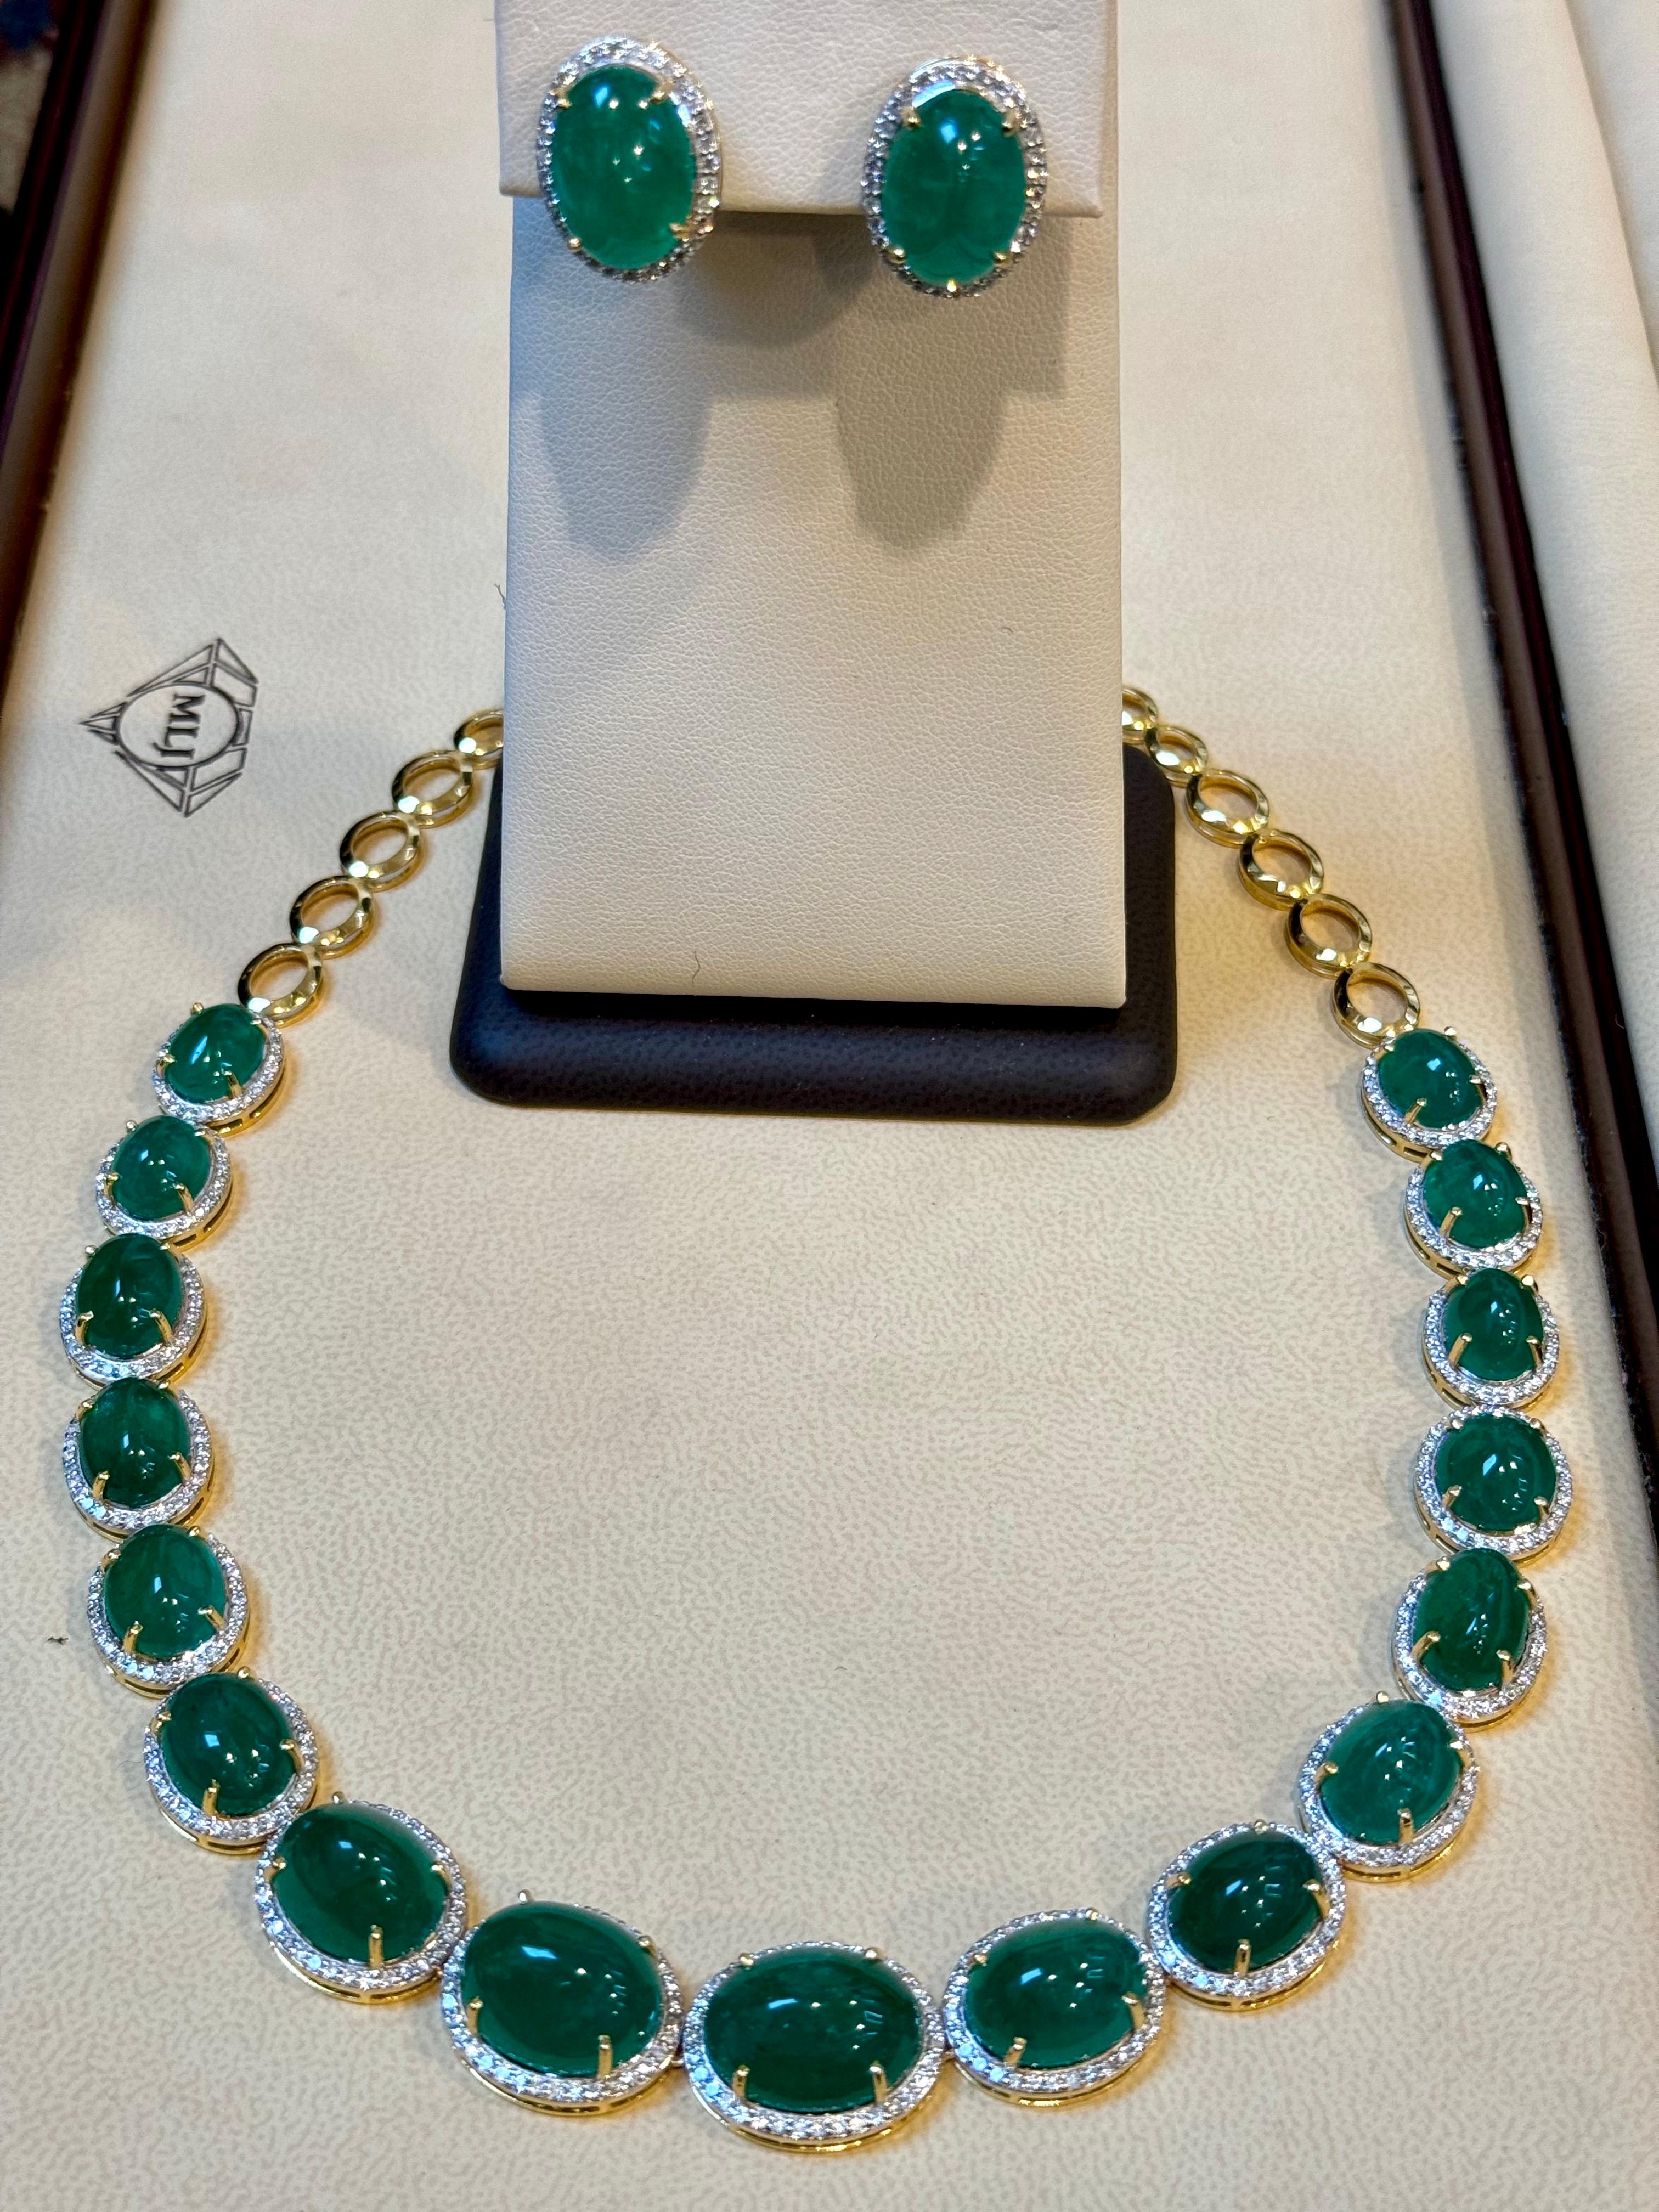 110 Ct Oval Natural Cabochon Emerald & Diamond Necklace, Earring Suite 14 K Gold For Sale 14